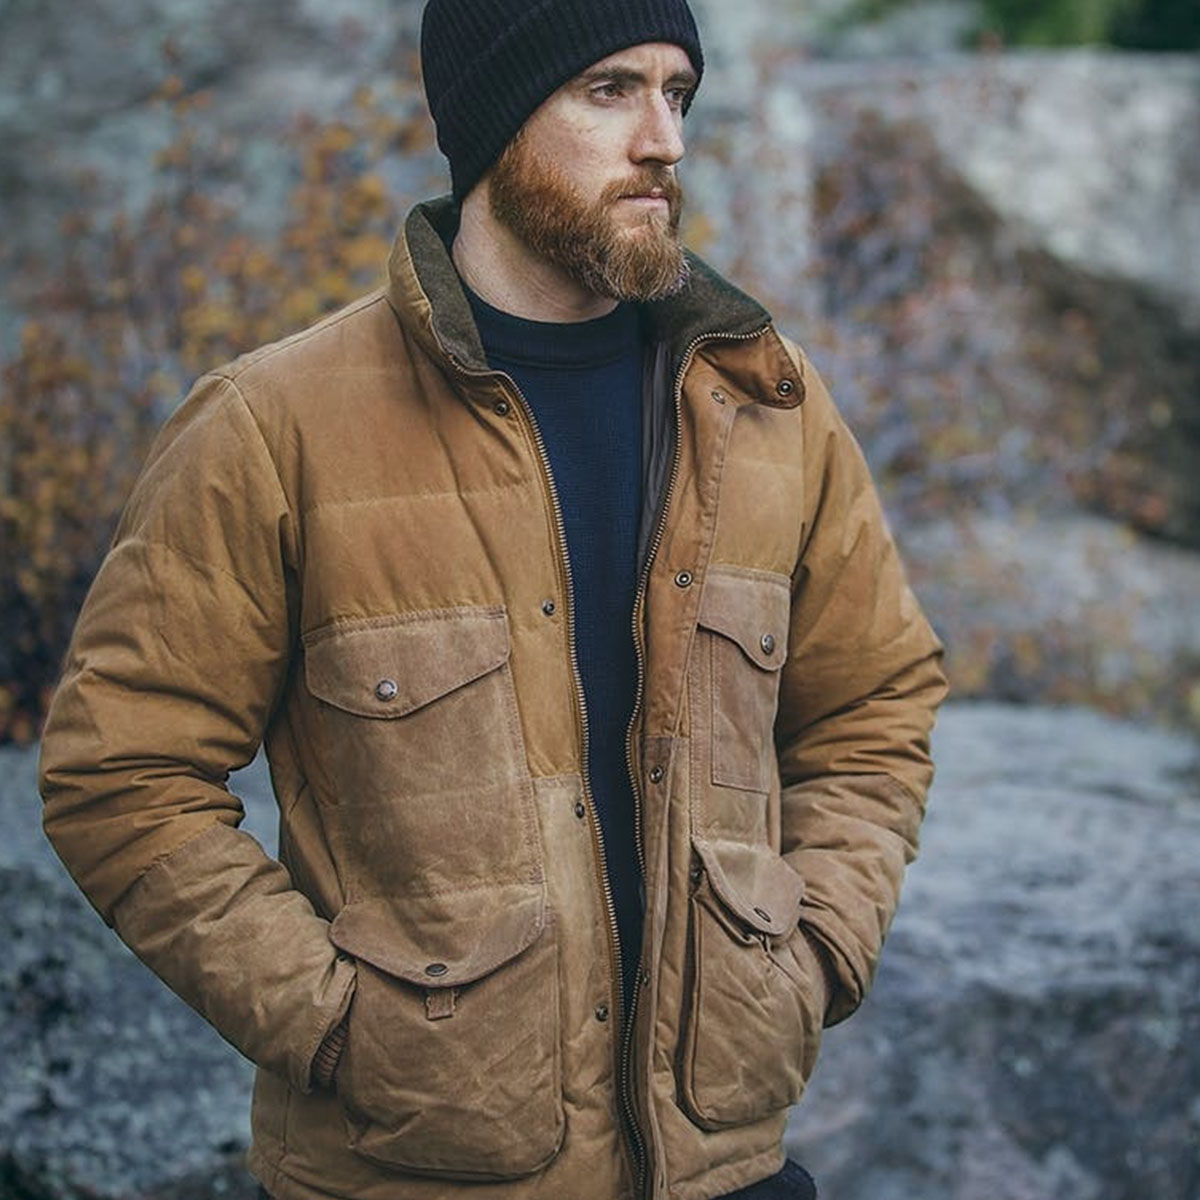 Filson Down Cruiser Jacket Dark Tan, Weather-resistant Cover Cloth Shell with responsibly-sourced down insulation